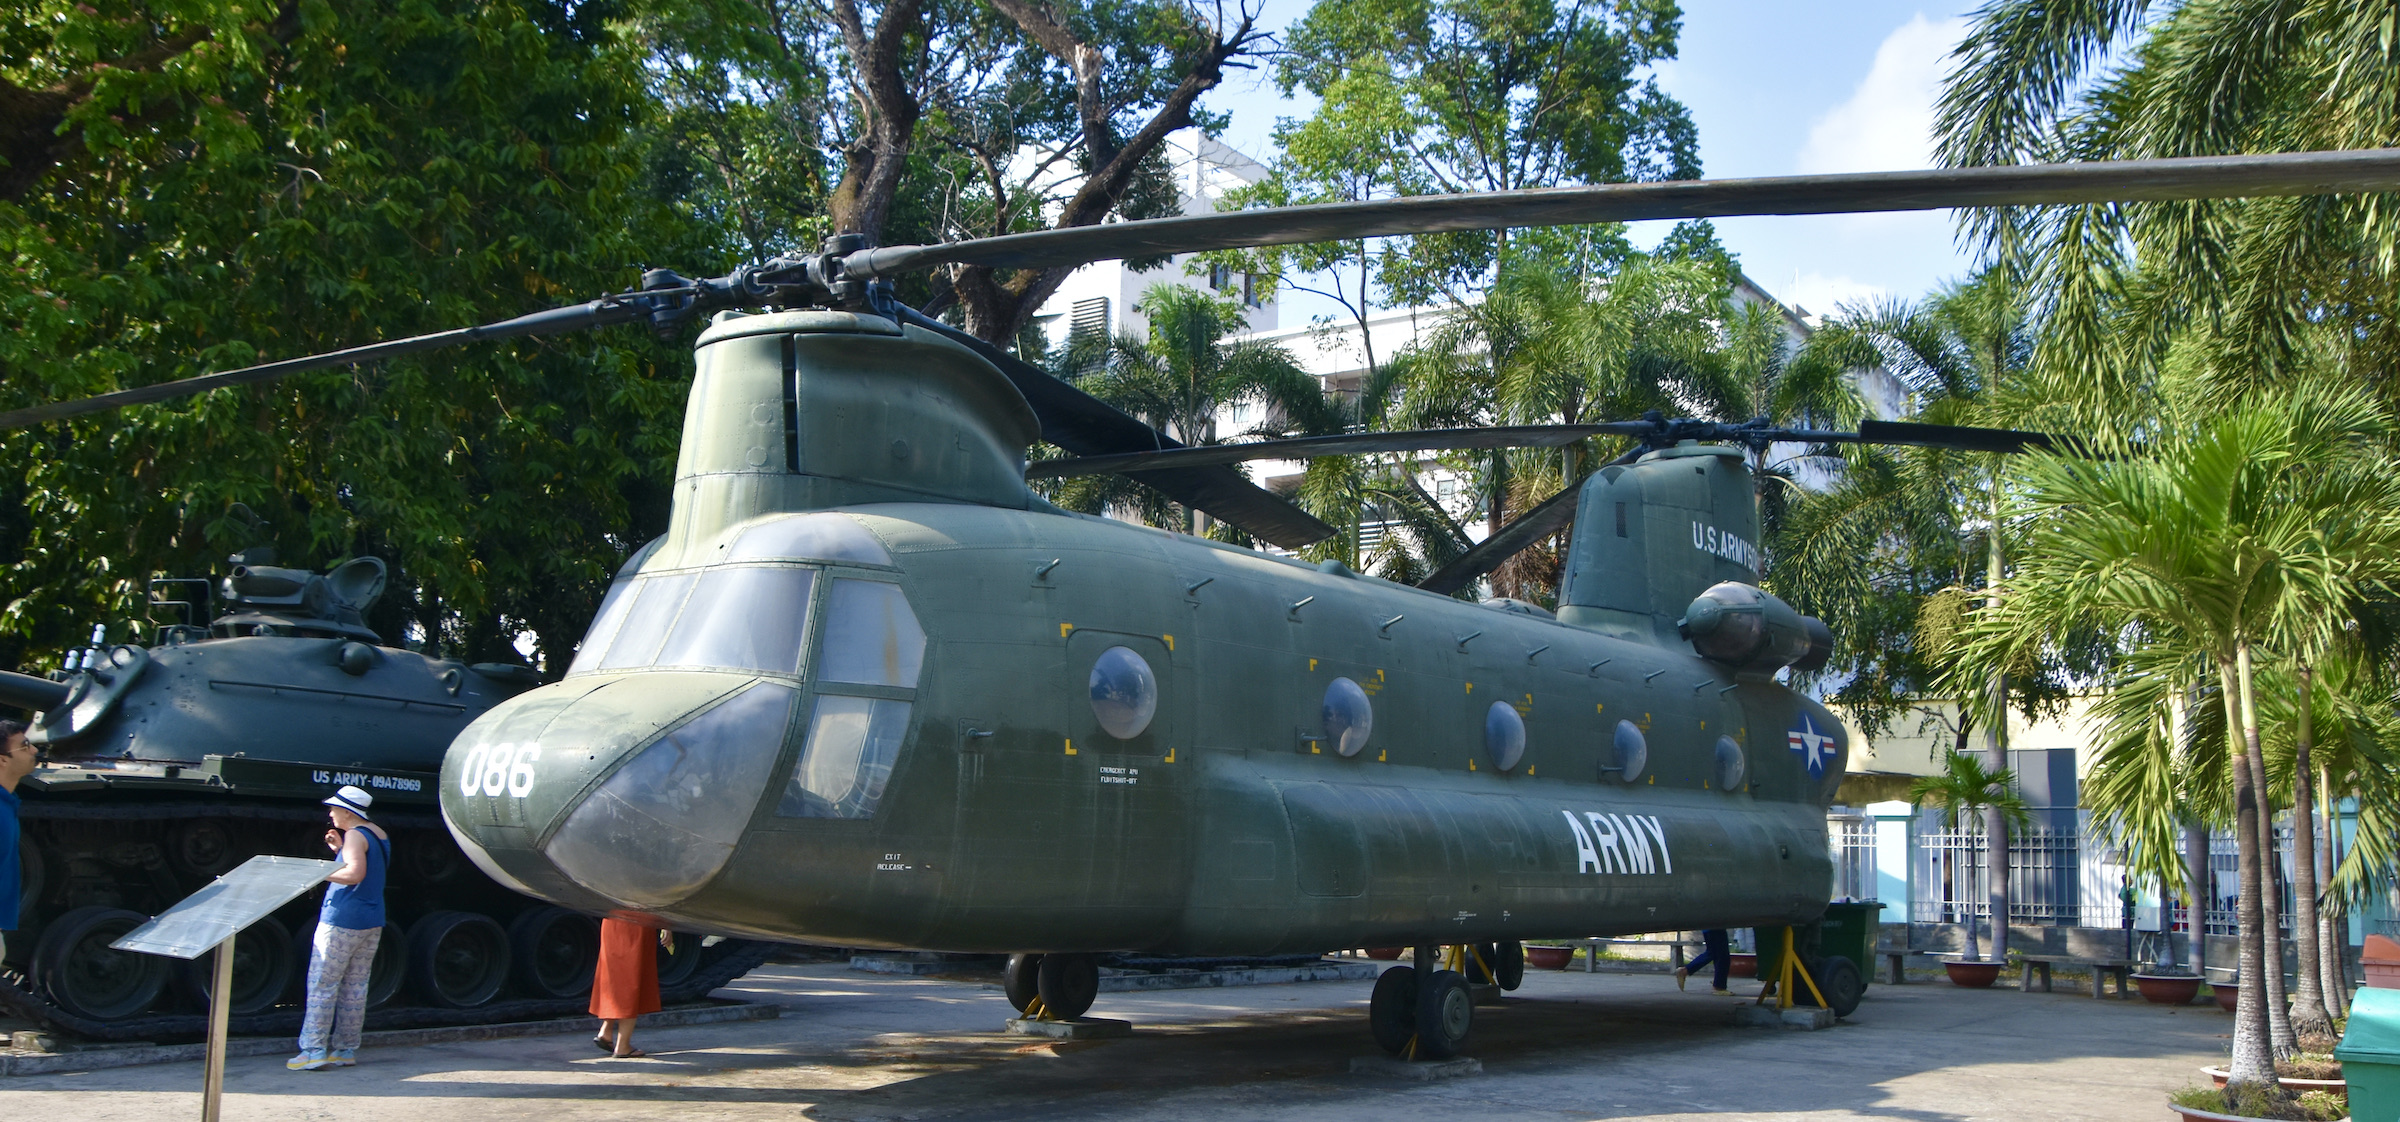 Chinook Helicopter, War Remnants Museum, Saigon